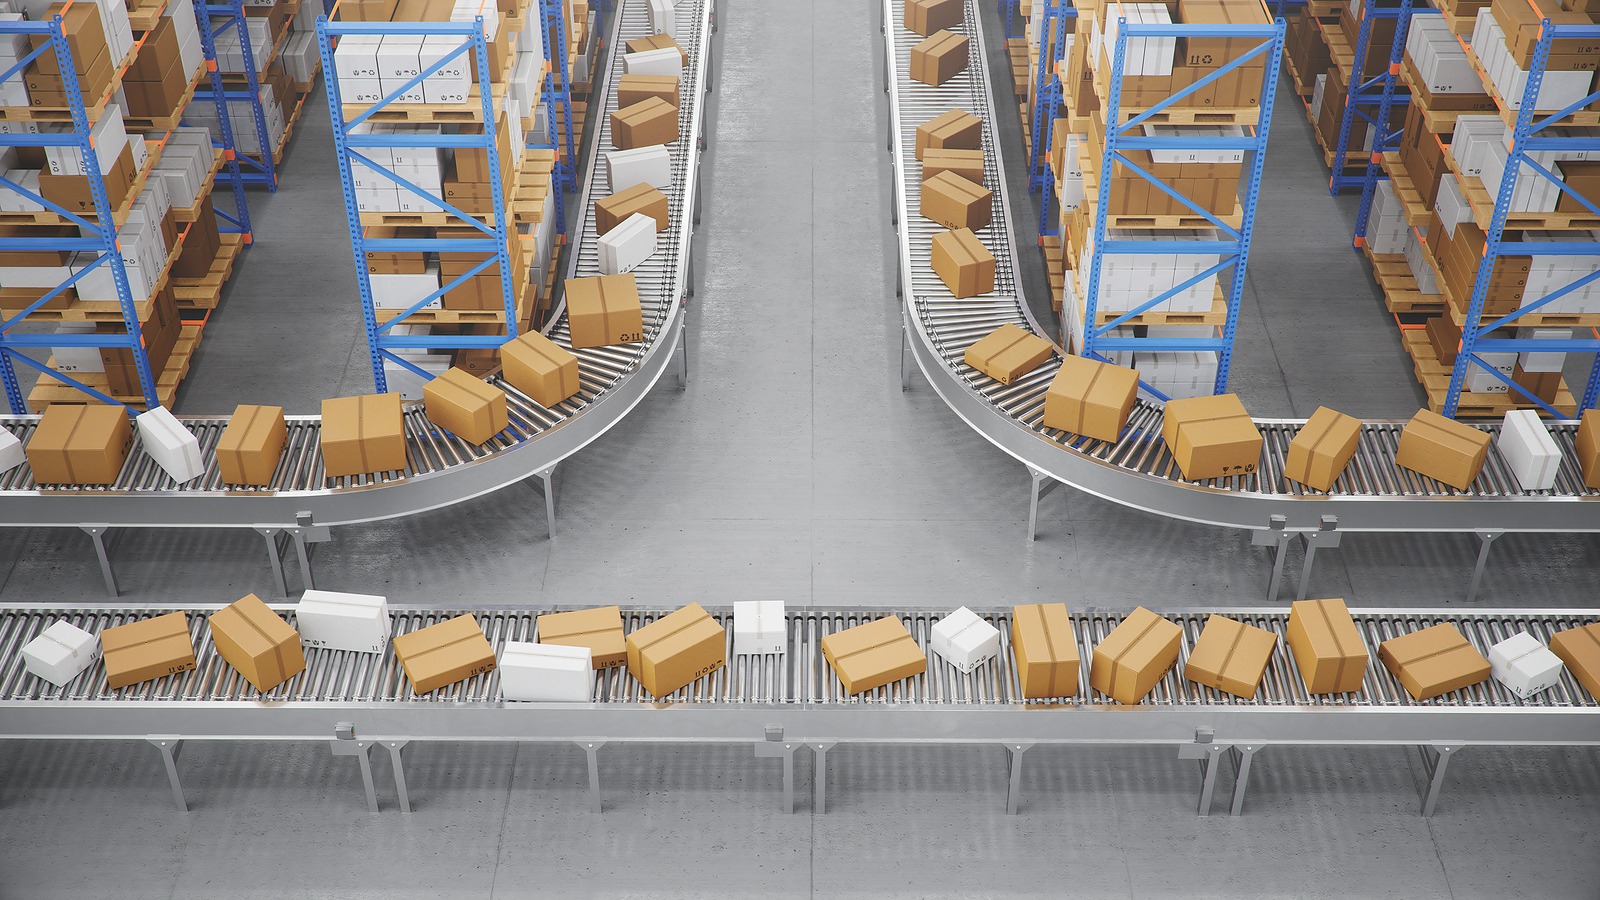 parcel delivery fulfilment operations at a distribution centre